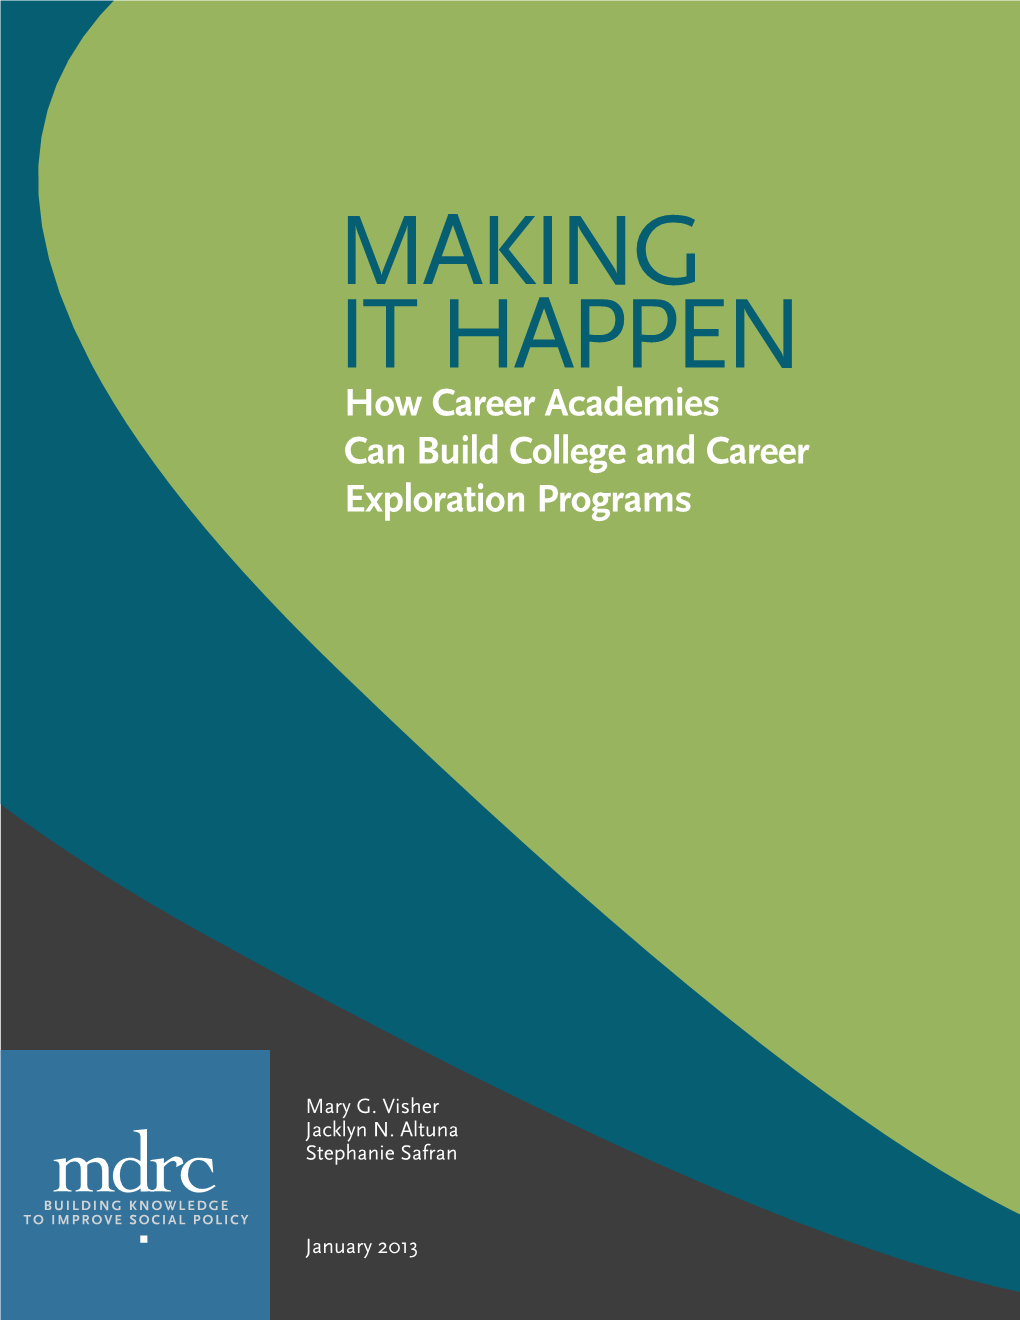 MAKING IT HAPPEN How Career Academies Can Build College and Career Exploration Programs